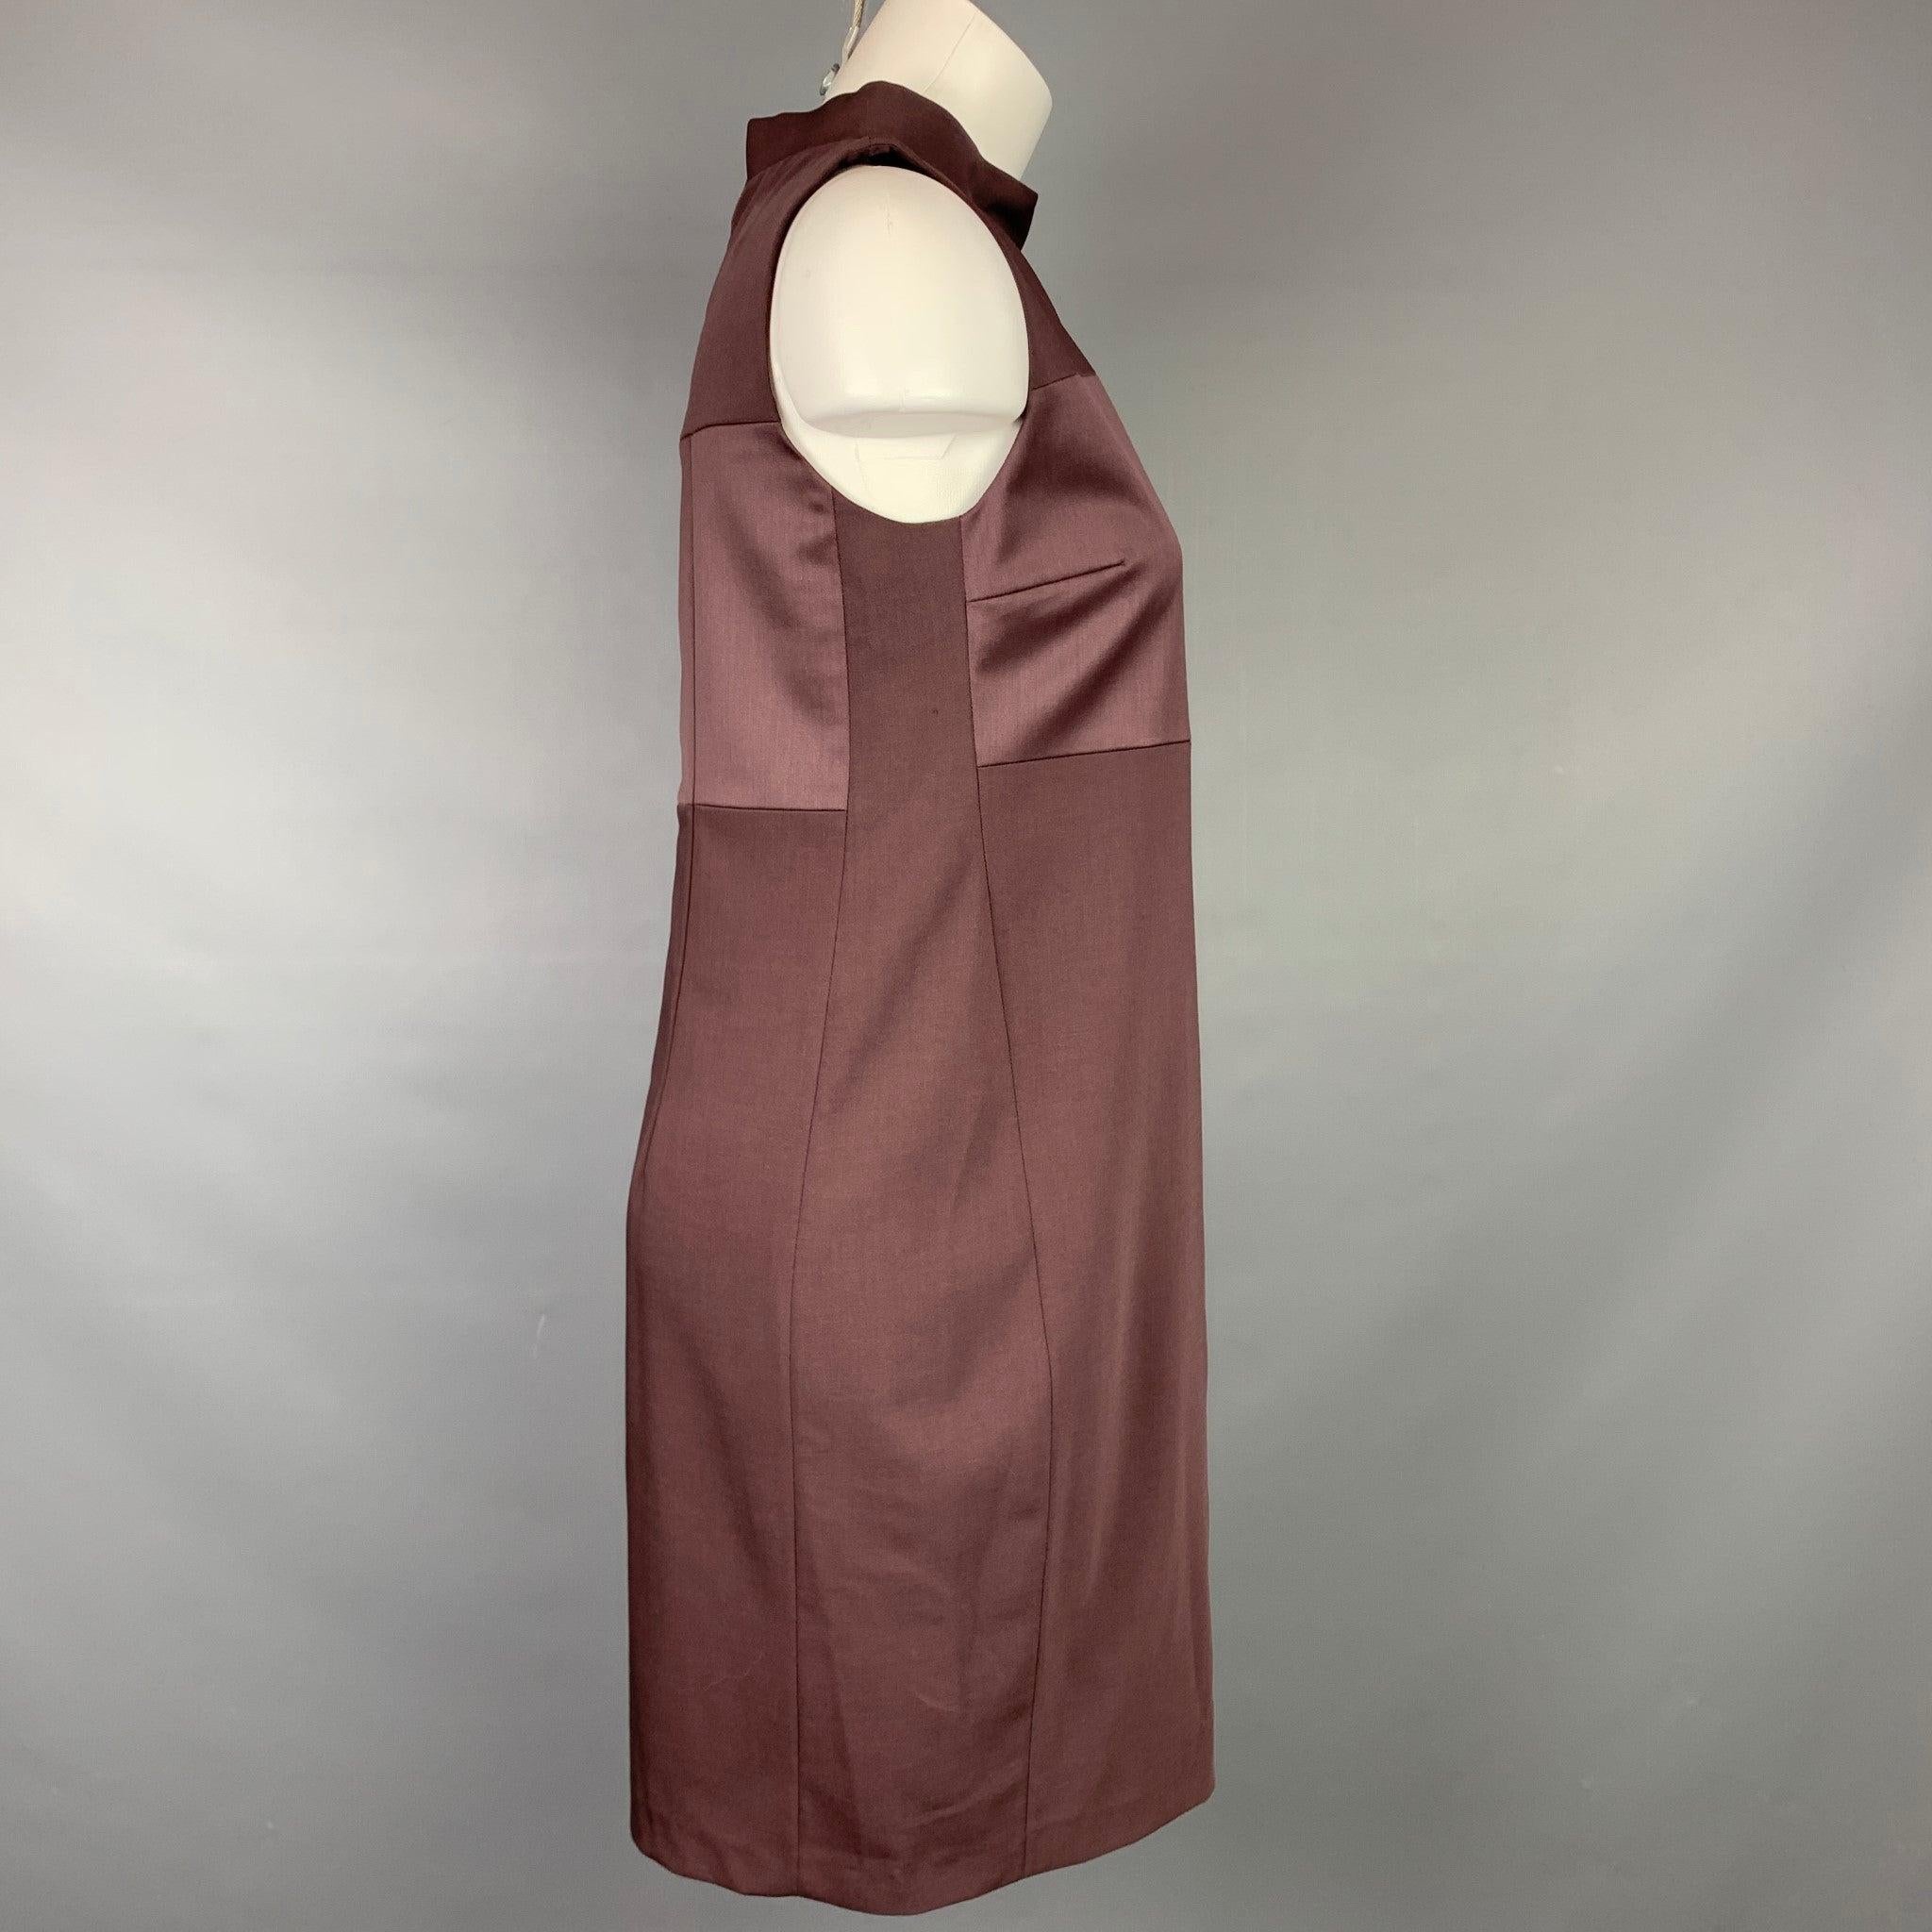 BRUNELLO CUCINELLI dress comes in a eggplant virgin wool with a slip liner featuring a mock turtleneck, a-line, top stitching, and a back zipper closure. Made in Italy.Very Good
Pre-Owned Condition. 

Marked:   M 

Measurements: 
  Bust: 33 inches 